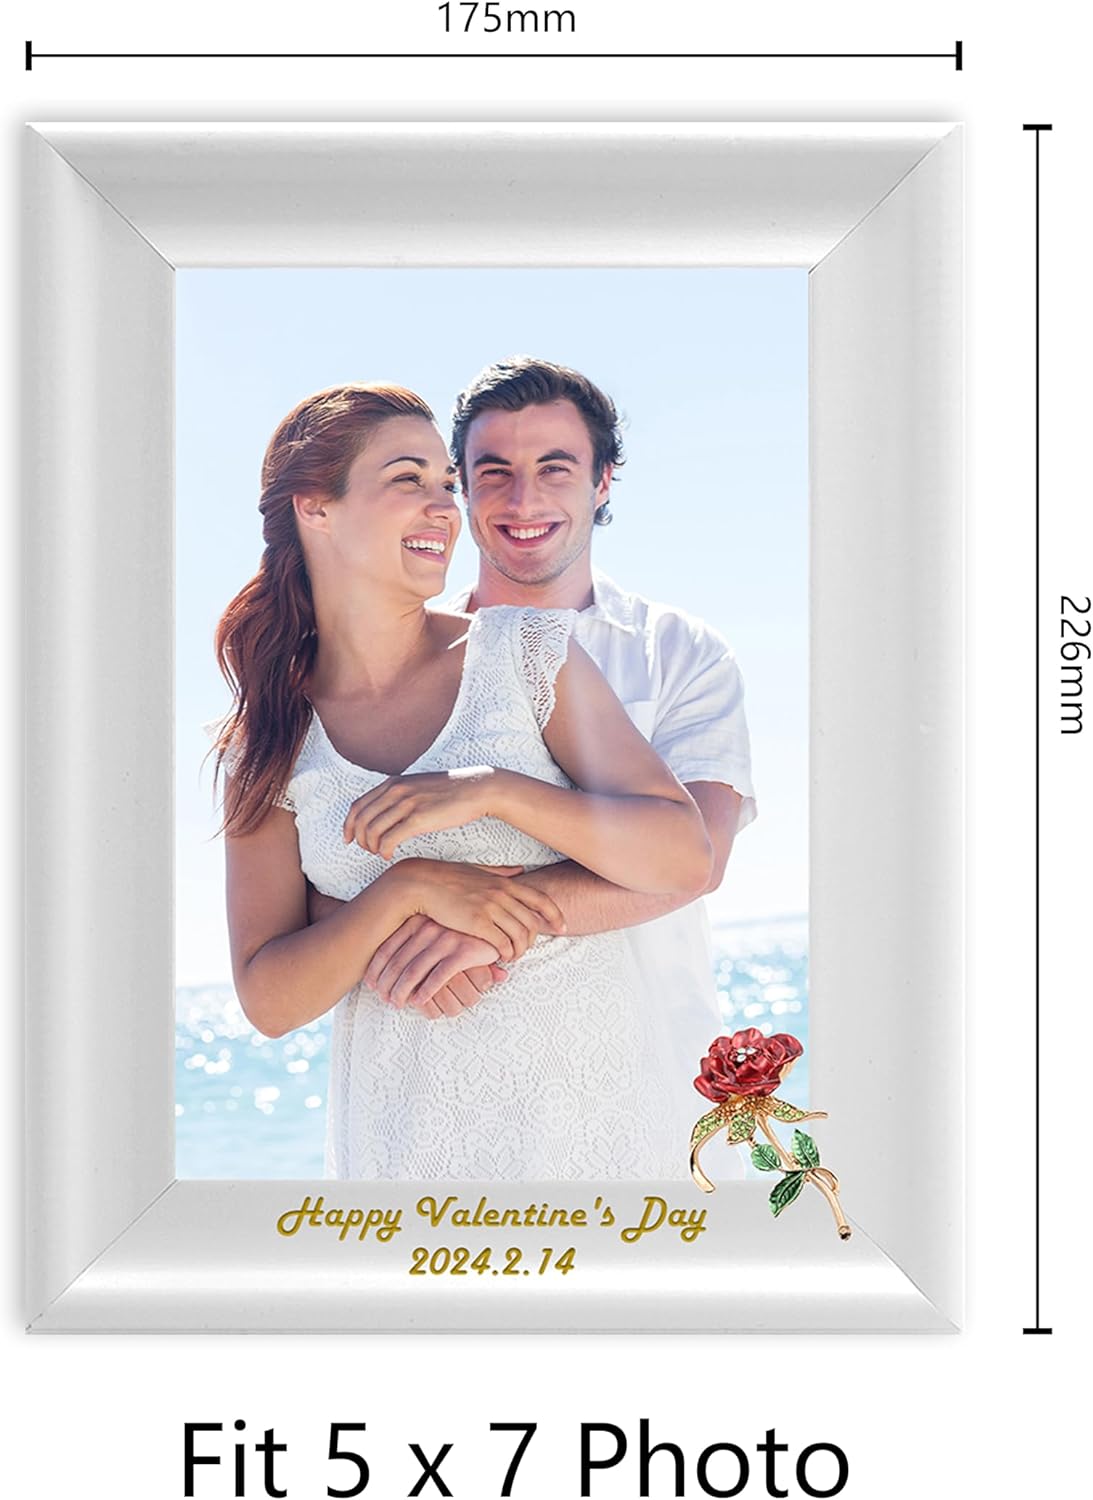 Wall Photo Frame Decoration Dotride Custom Picture Frame with a Flower Decoration, Wood Photo Frame with Custom Wooden Carving, Can be engraved with any text you want, suitable for Valentine's Day, Red Rose